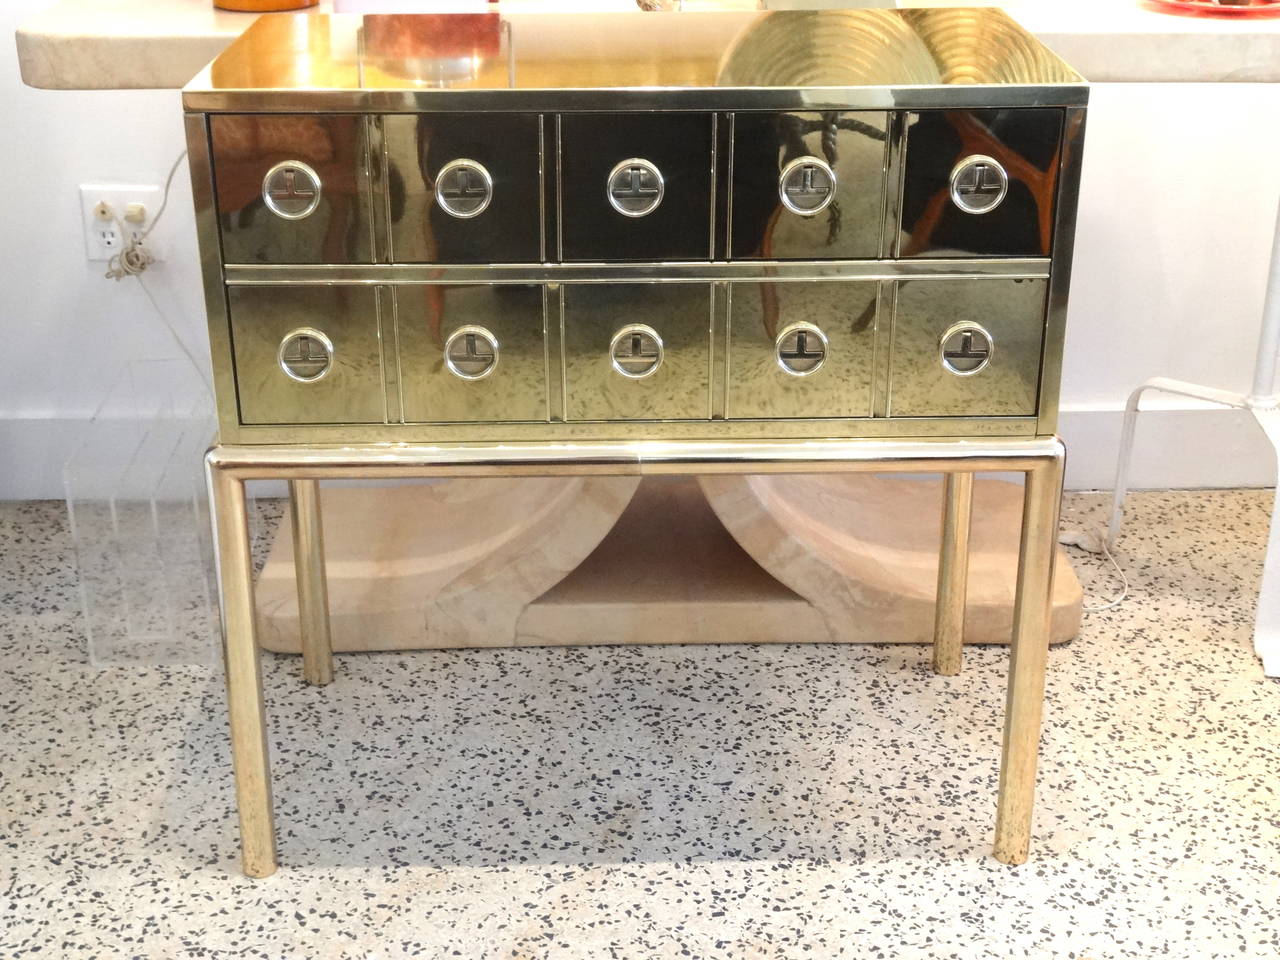 Mastercraft brass chest with nice hardware. Just polished.